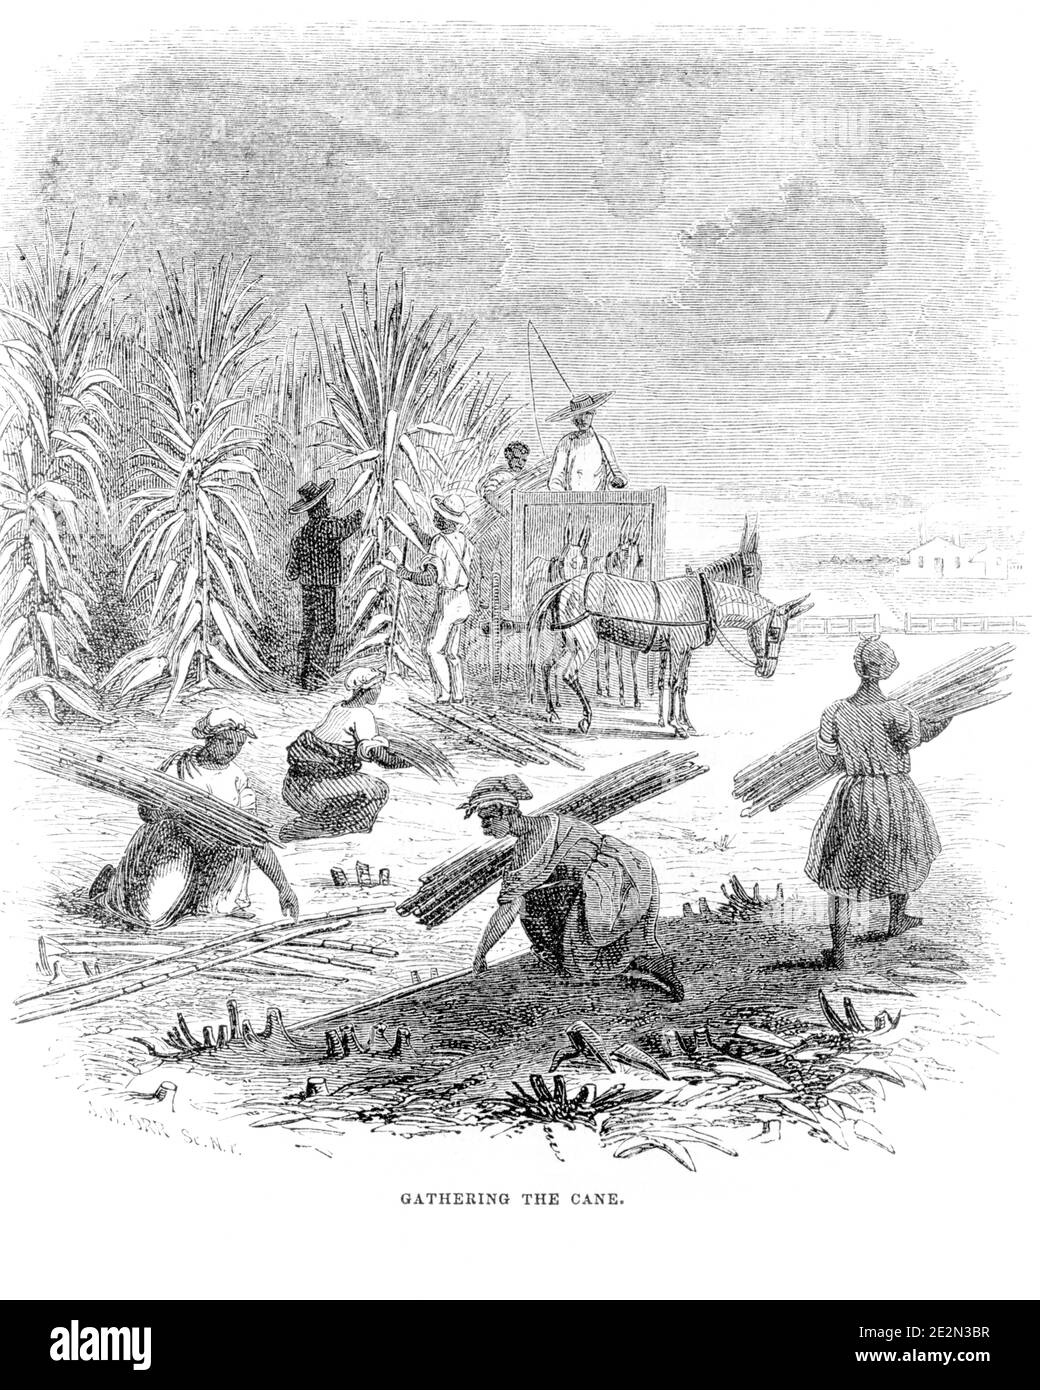 1840s 1850s DRAWING GATHERING SUGAR CANE ANTEBELLUM AFRICAN AMERICAN WORKERS SLAVES HARVESTING SUGAR CANE IN OLD SOUTH USA - o4827 LAN001 HARS JOBS CANE RURAL TRANSPORT UNITED STATES COPY SPACE LADIES PERSONS UNITED STATES OF AMERICA FARMING MALES SUGAR WHEELS TRANSPORTATION AGRICULTURE B&W GATHERING SADNESS NORTH AMERICA FREEDOM HARVESTING SKILL OCCUPATION SKILLS MAMMALS SLAVERY AFRICAN-AMERICANS AFRICAN-AMERICAN OLD SOUTH BLACK ETHNICITY LABOR IN OCCUPATIONS SOUTHERN MULES WAGONS 1850s MAMMAL PLANTATION SLAVE SUGAR CANE YOUNG ADULT MAN YOUNG ADULT WOMAN 1840s ANTEBELLUM BLACK AND WHITE Stock Photo